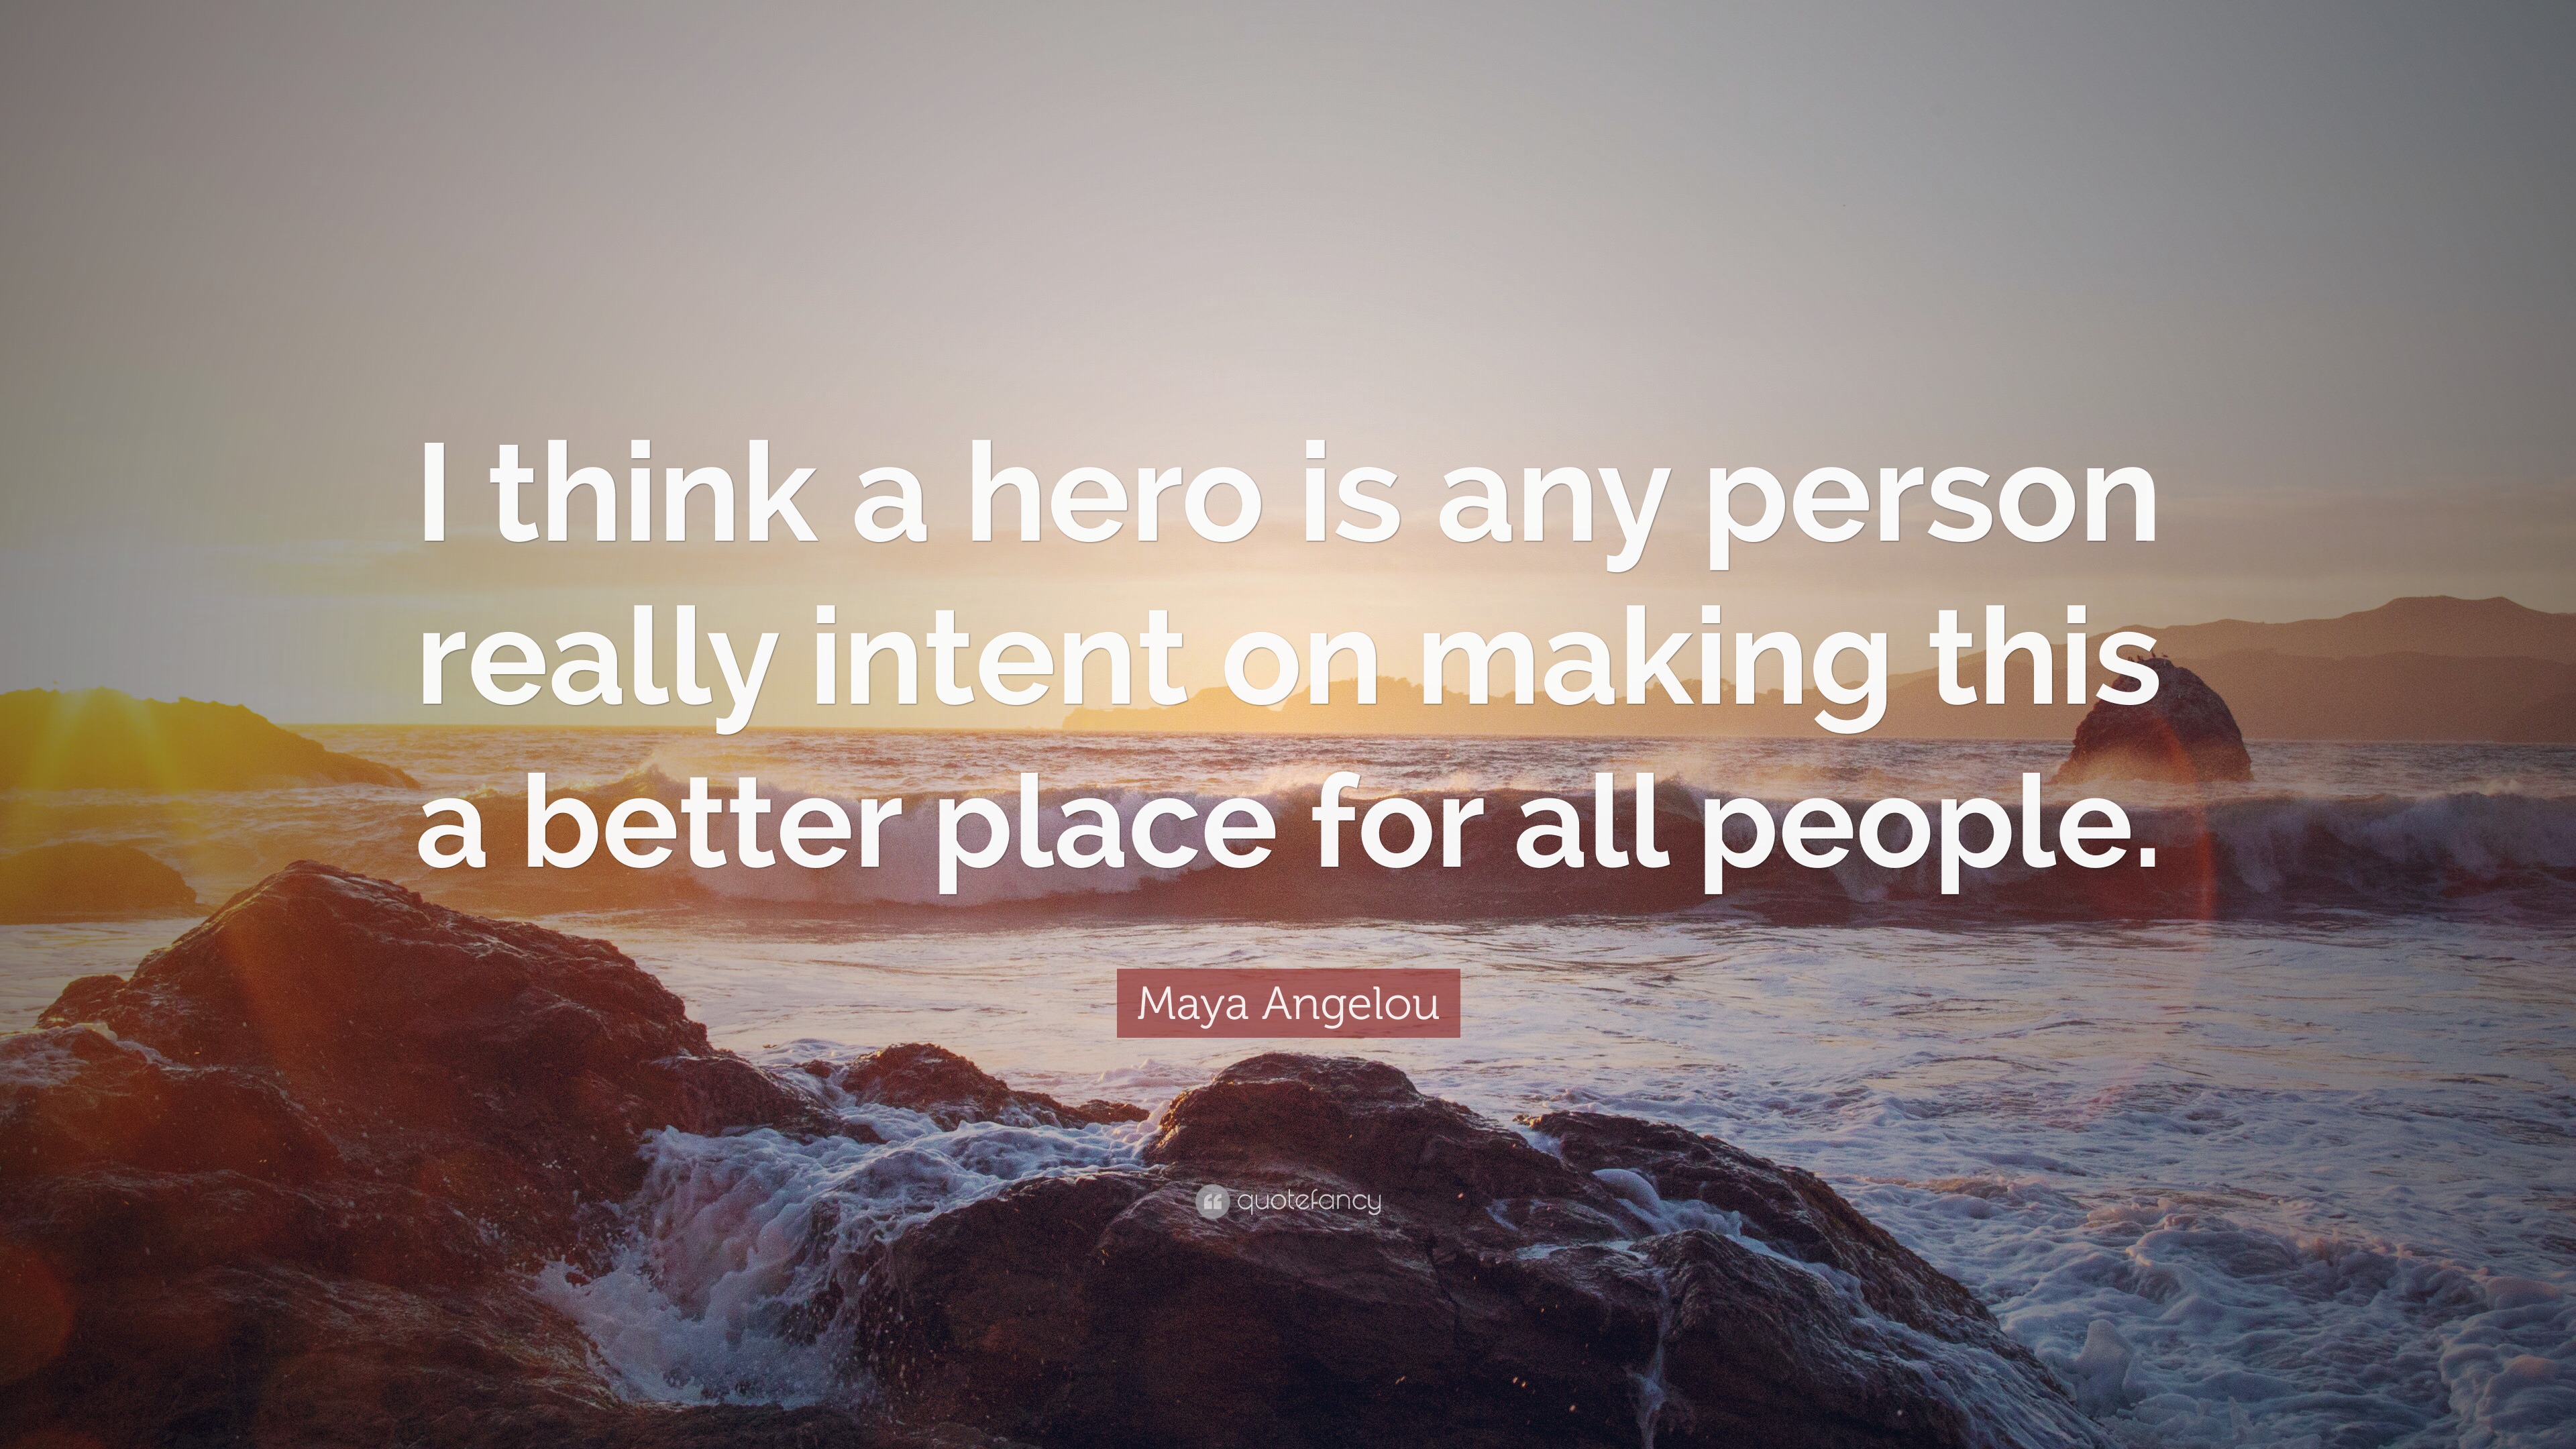 Maya Angelou Quote: “I think a hero is any person really intent on ...